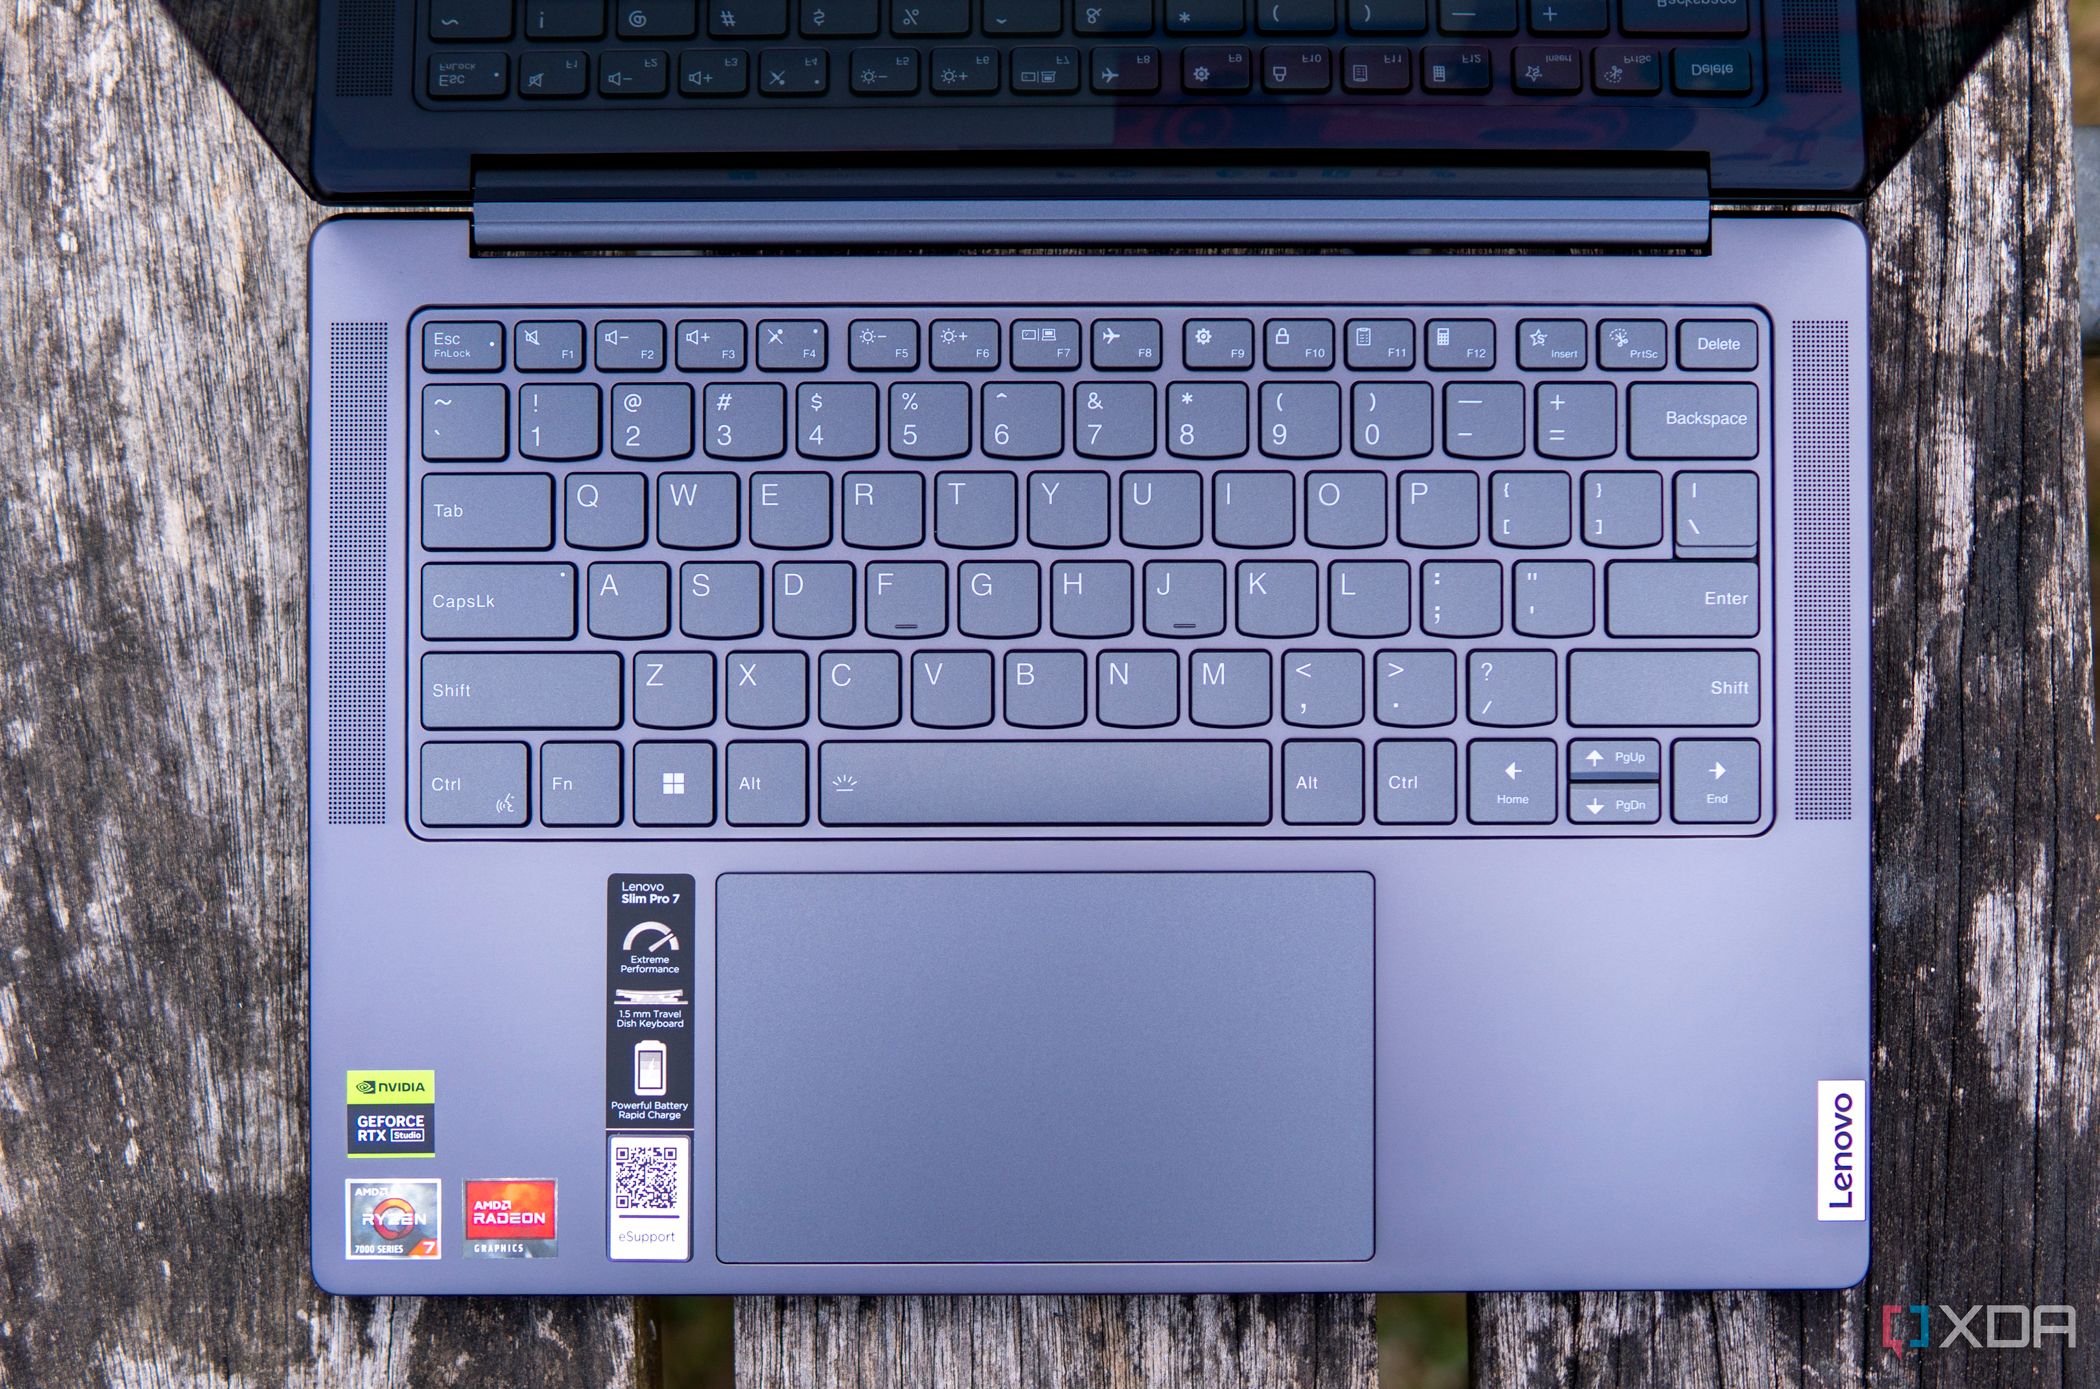 Overhead view of the Lenovo Slim Pro 7 keyboard and touchpad